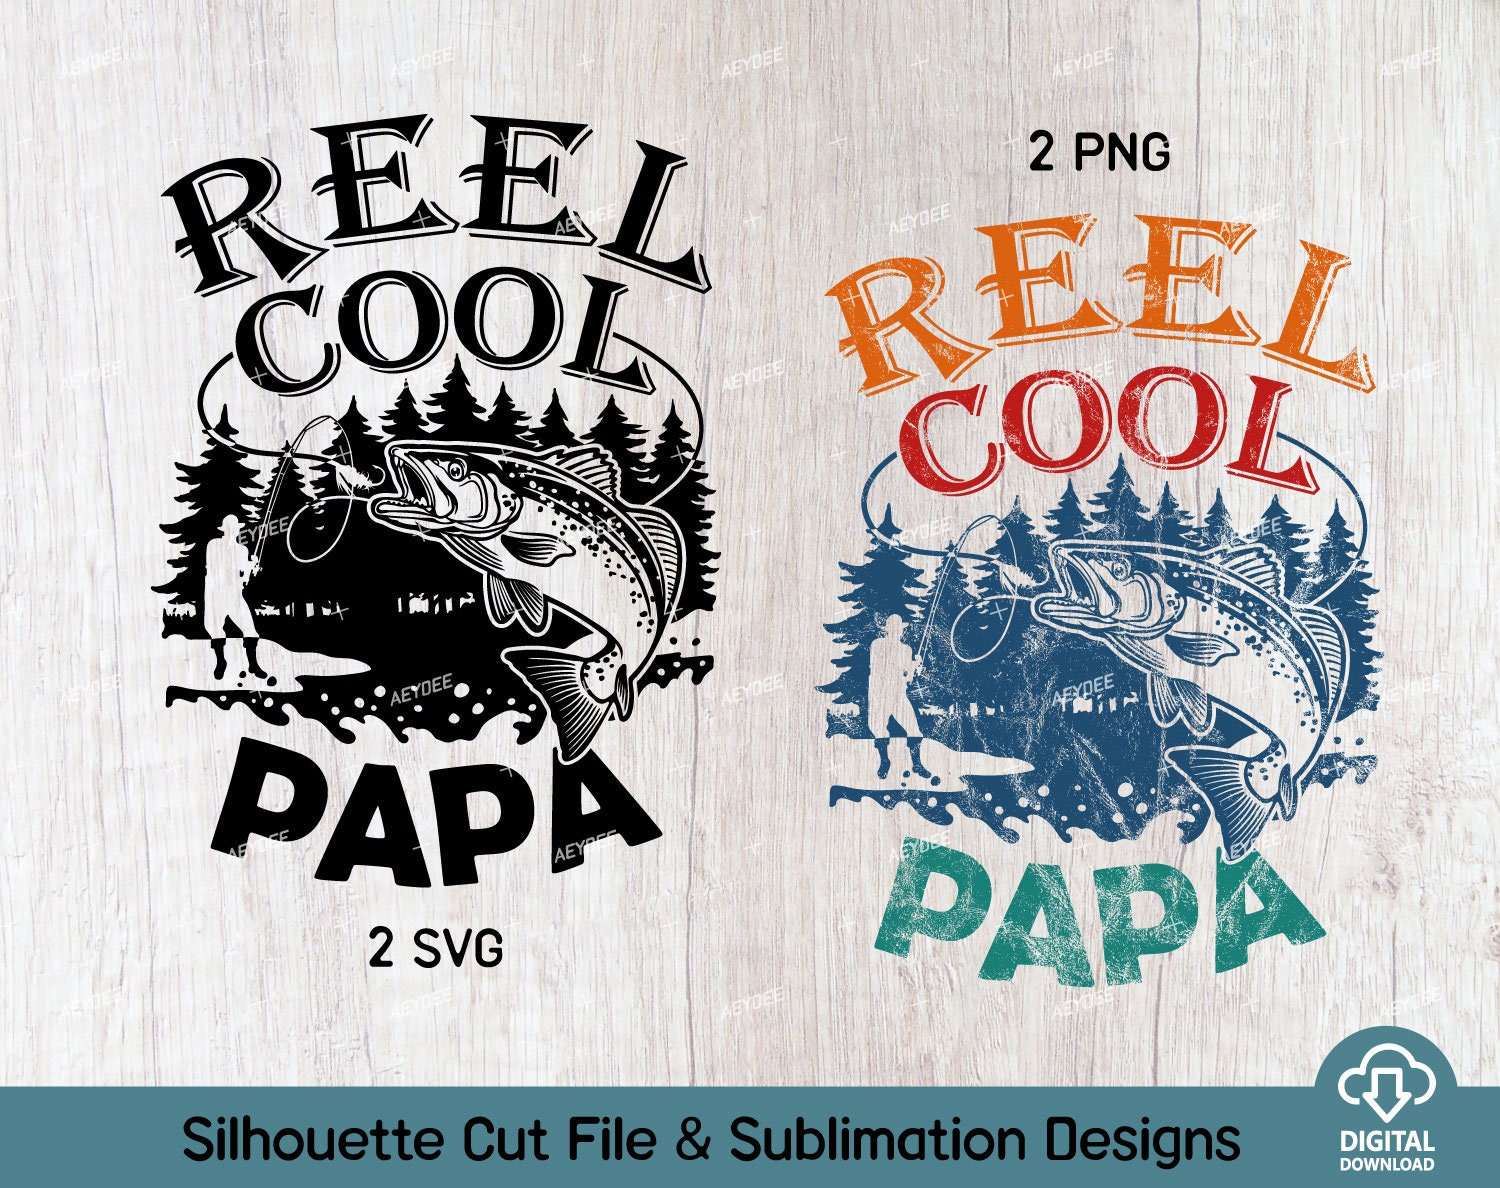 Reel Cool Papa Png and Svg Files, Papa Fishing Shirt Svg Png, Fishing  Digital Download, Father's Day Fishing Vintage Designs for Sublimation 